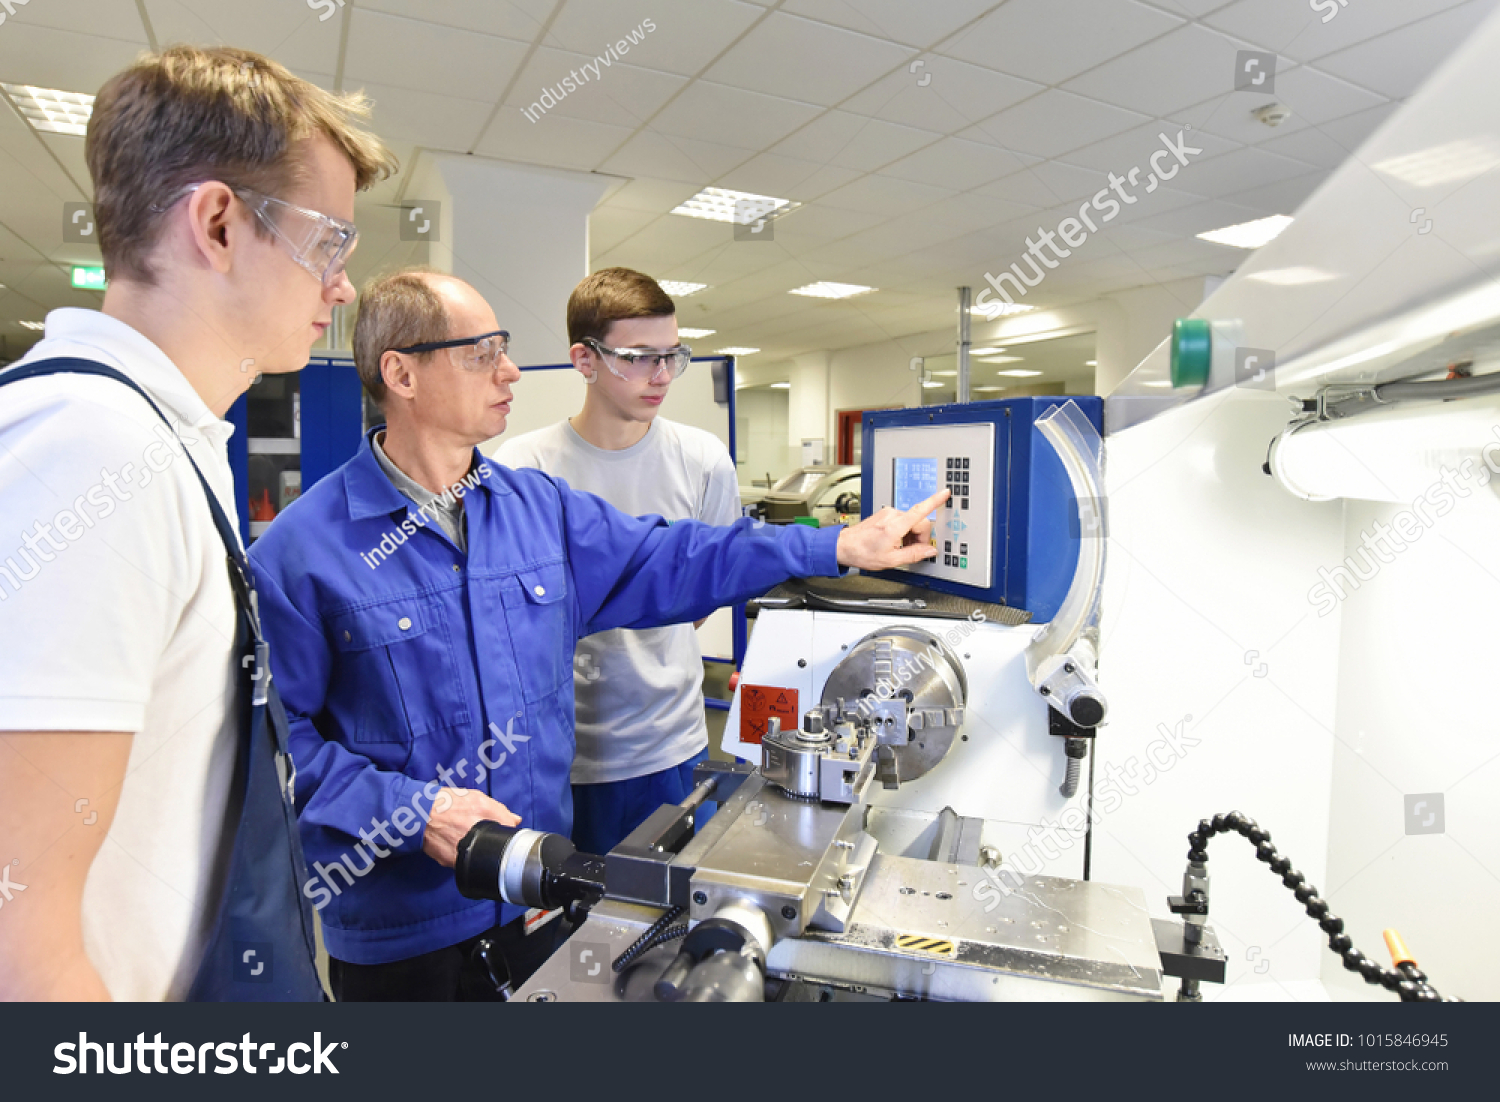 young apprentices in technical vocational training are taught by older trainers on a cnc lathes machine #1015846945